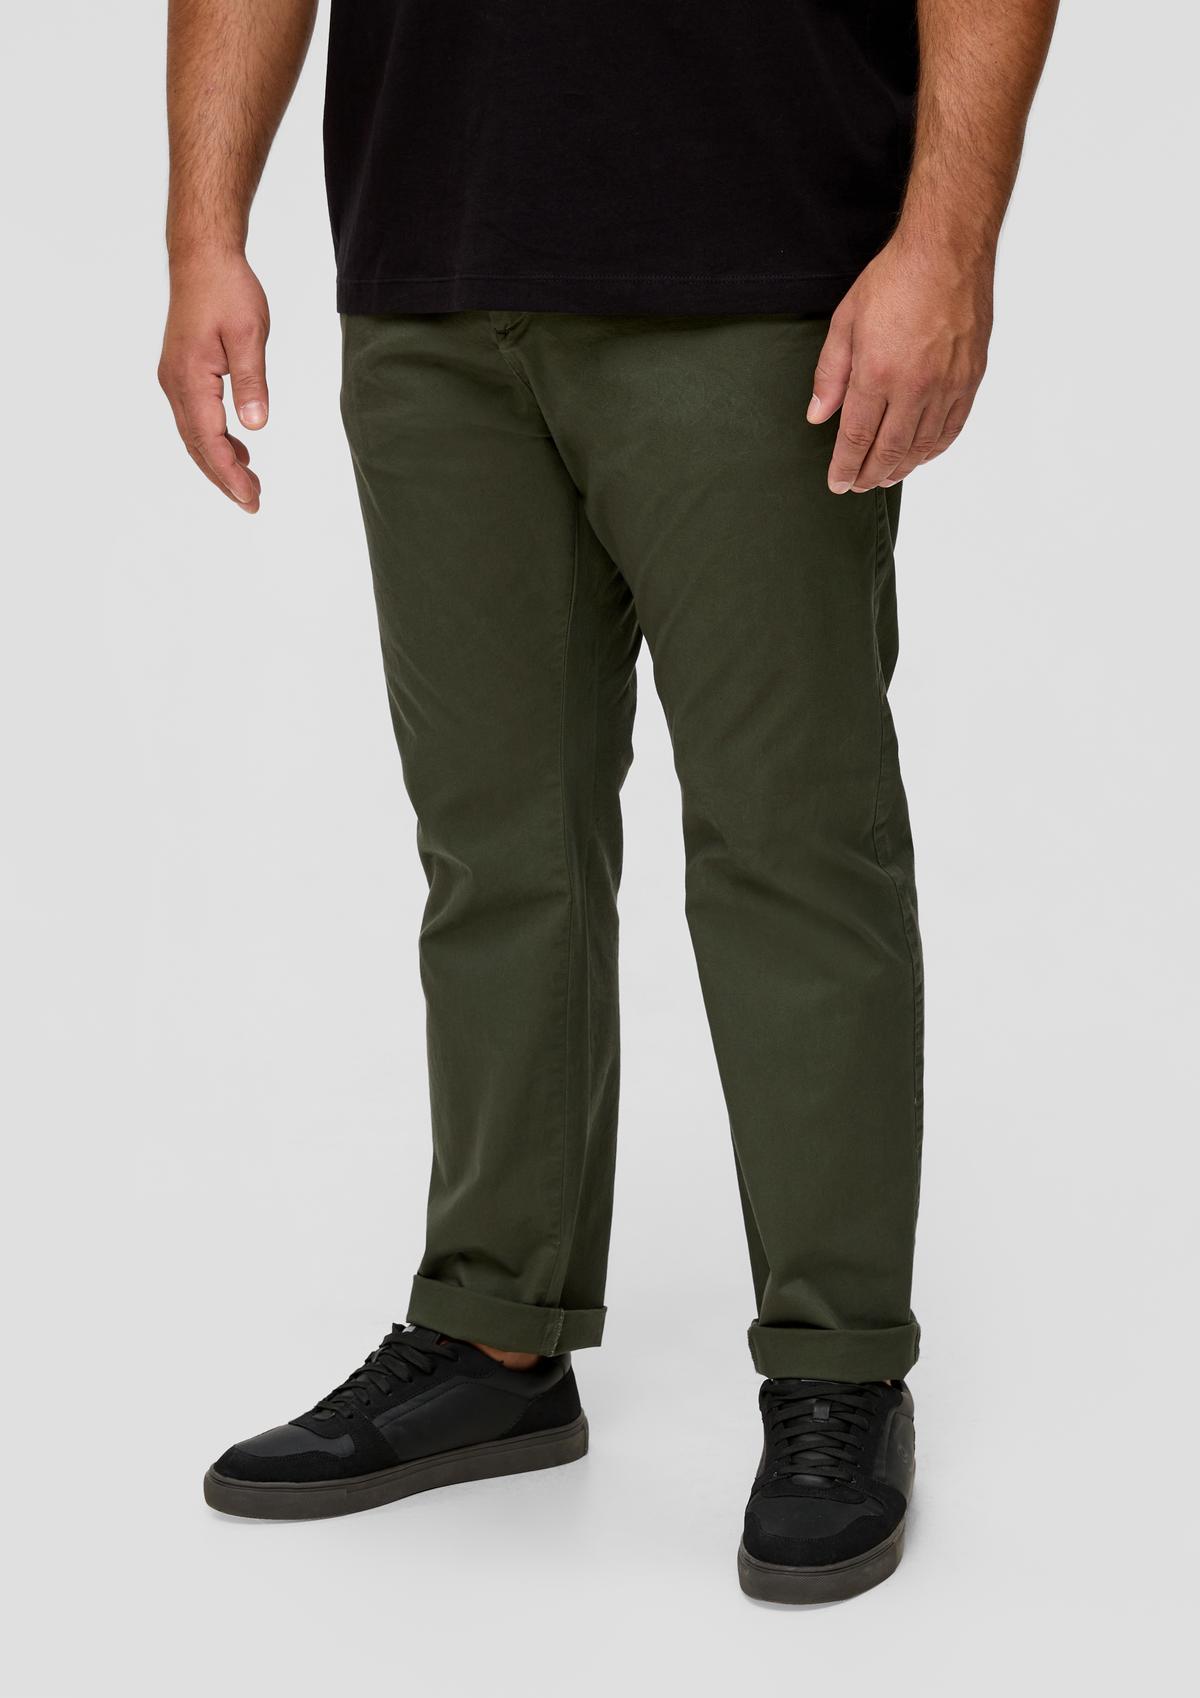 s.Oliver Detroit: chino nohavice strihu Relaxed Fit